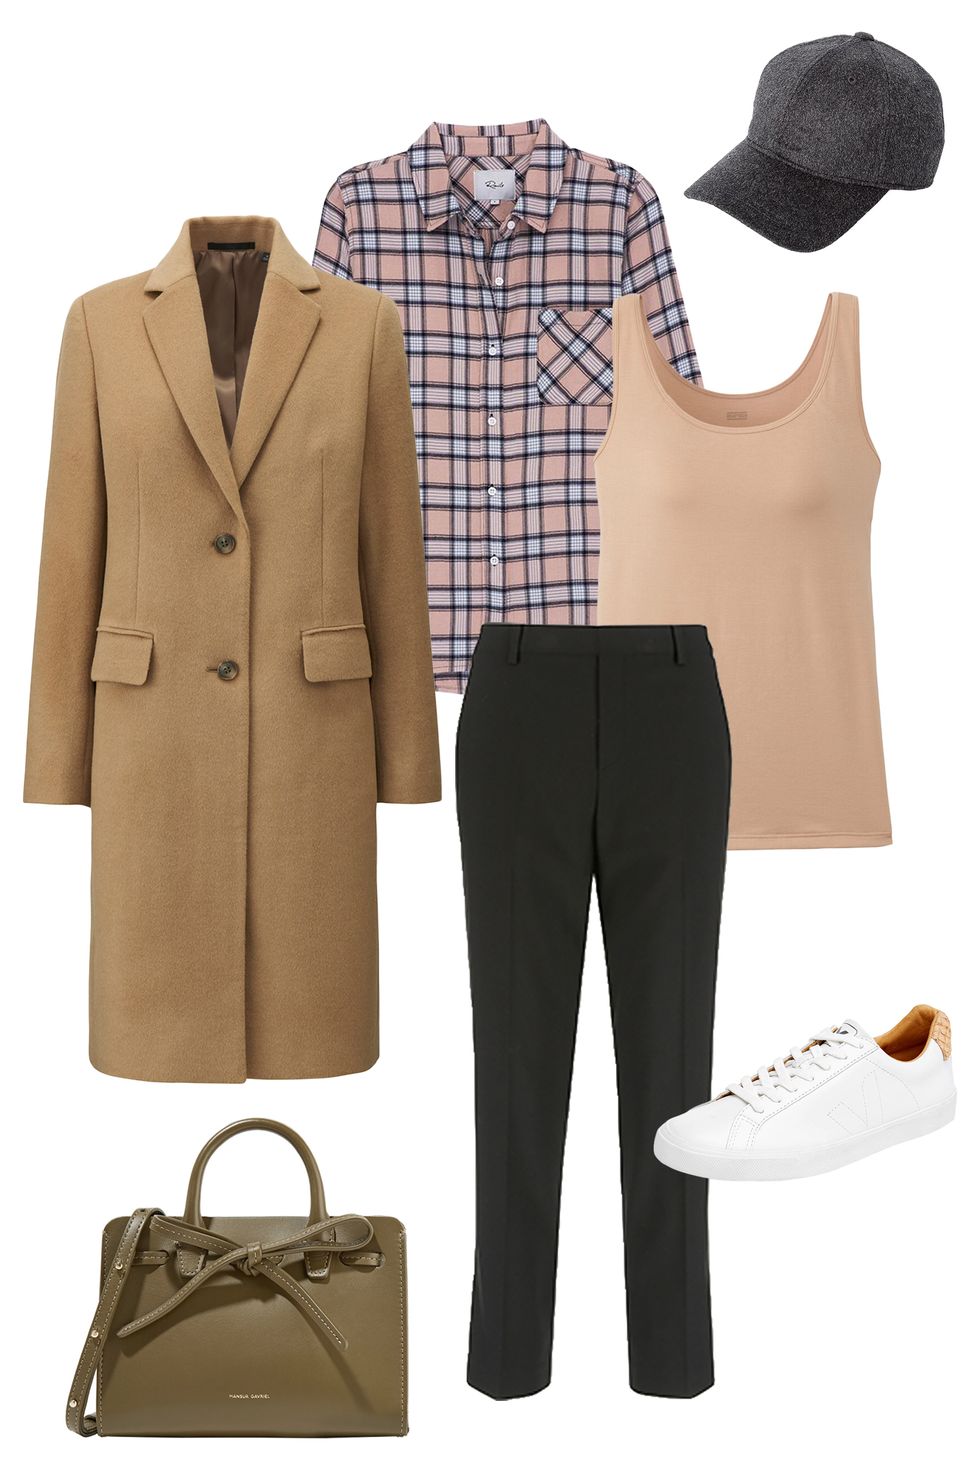 What to Wear Every Day of the Week - Outfits for Monday through Friday